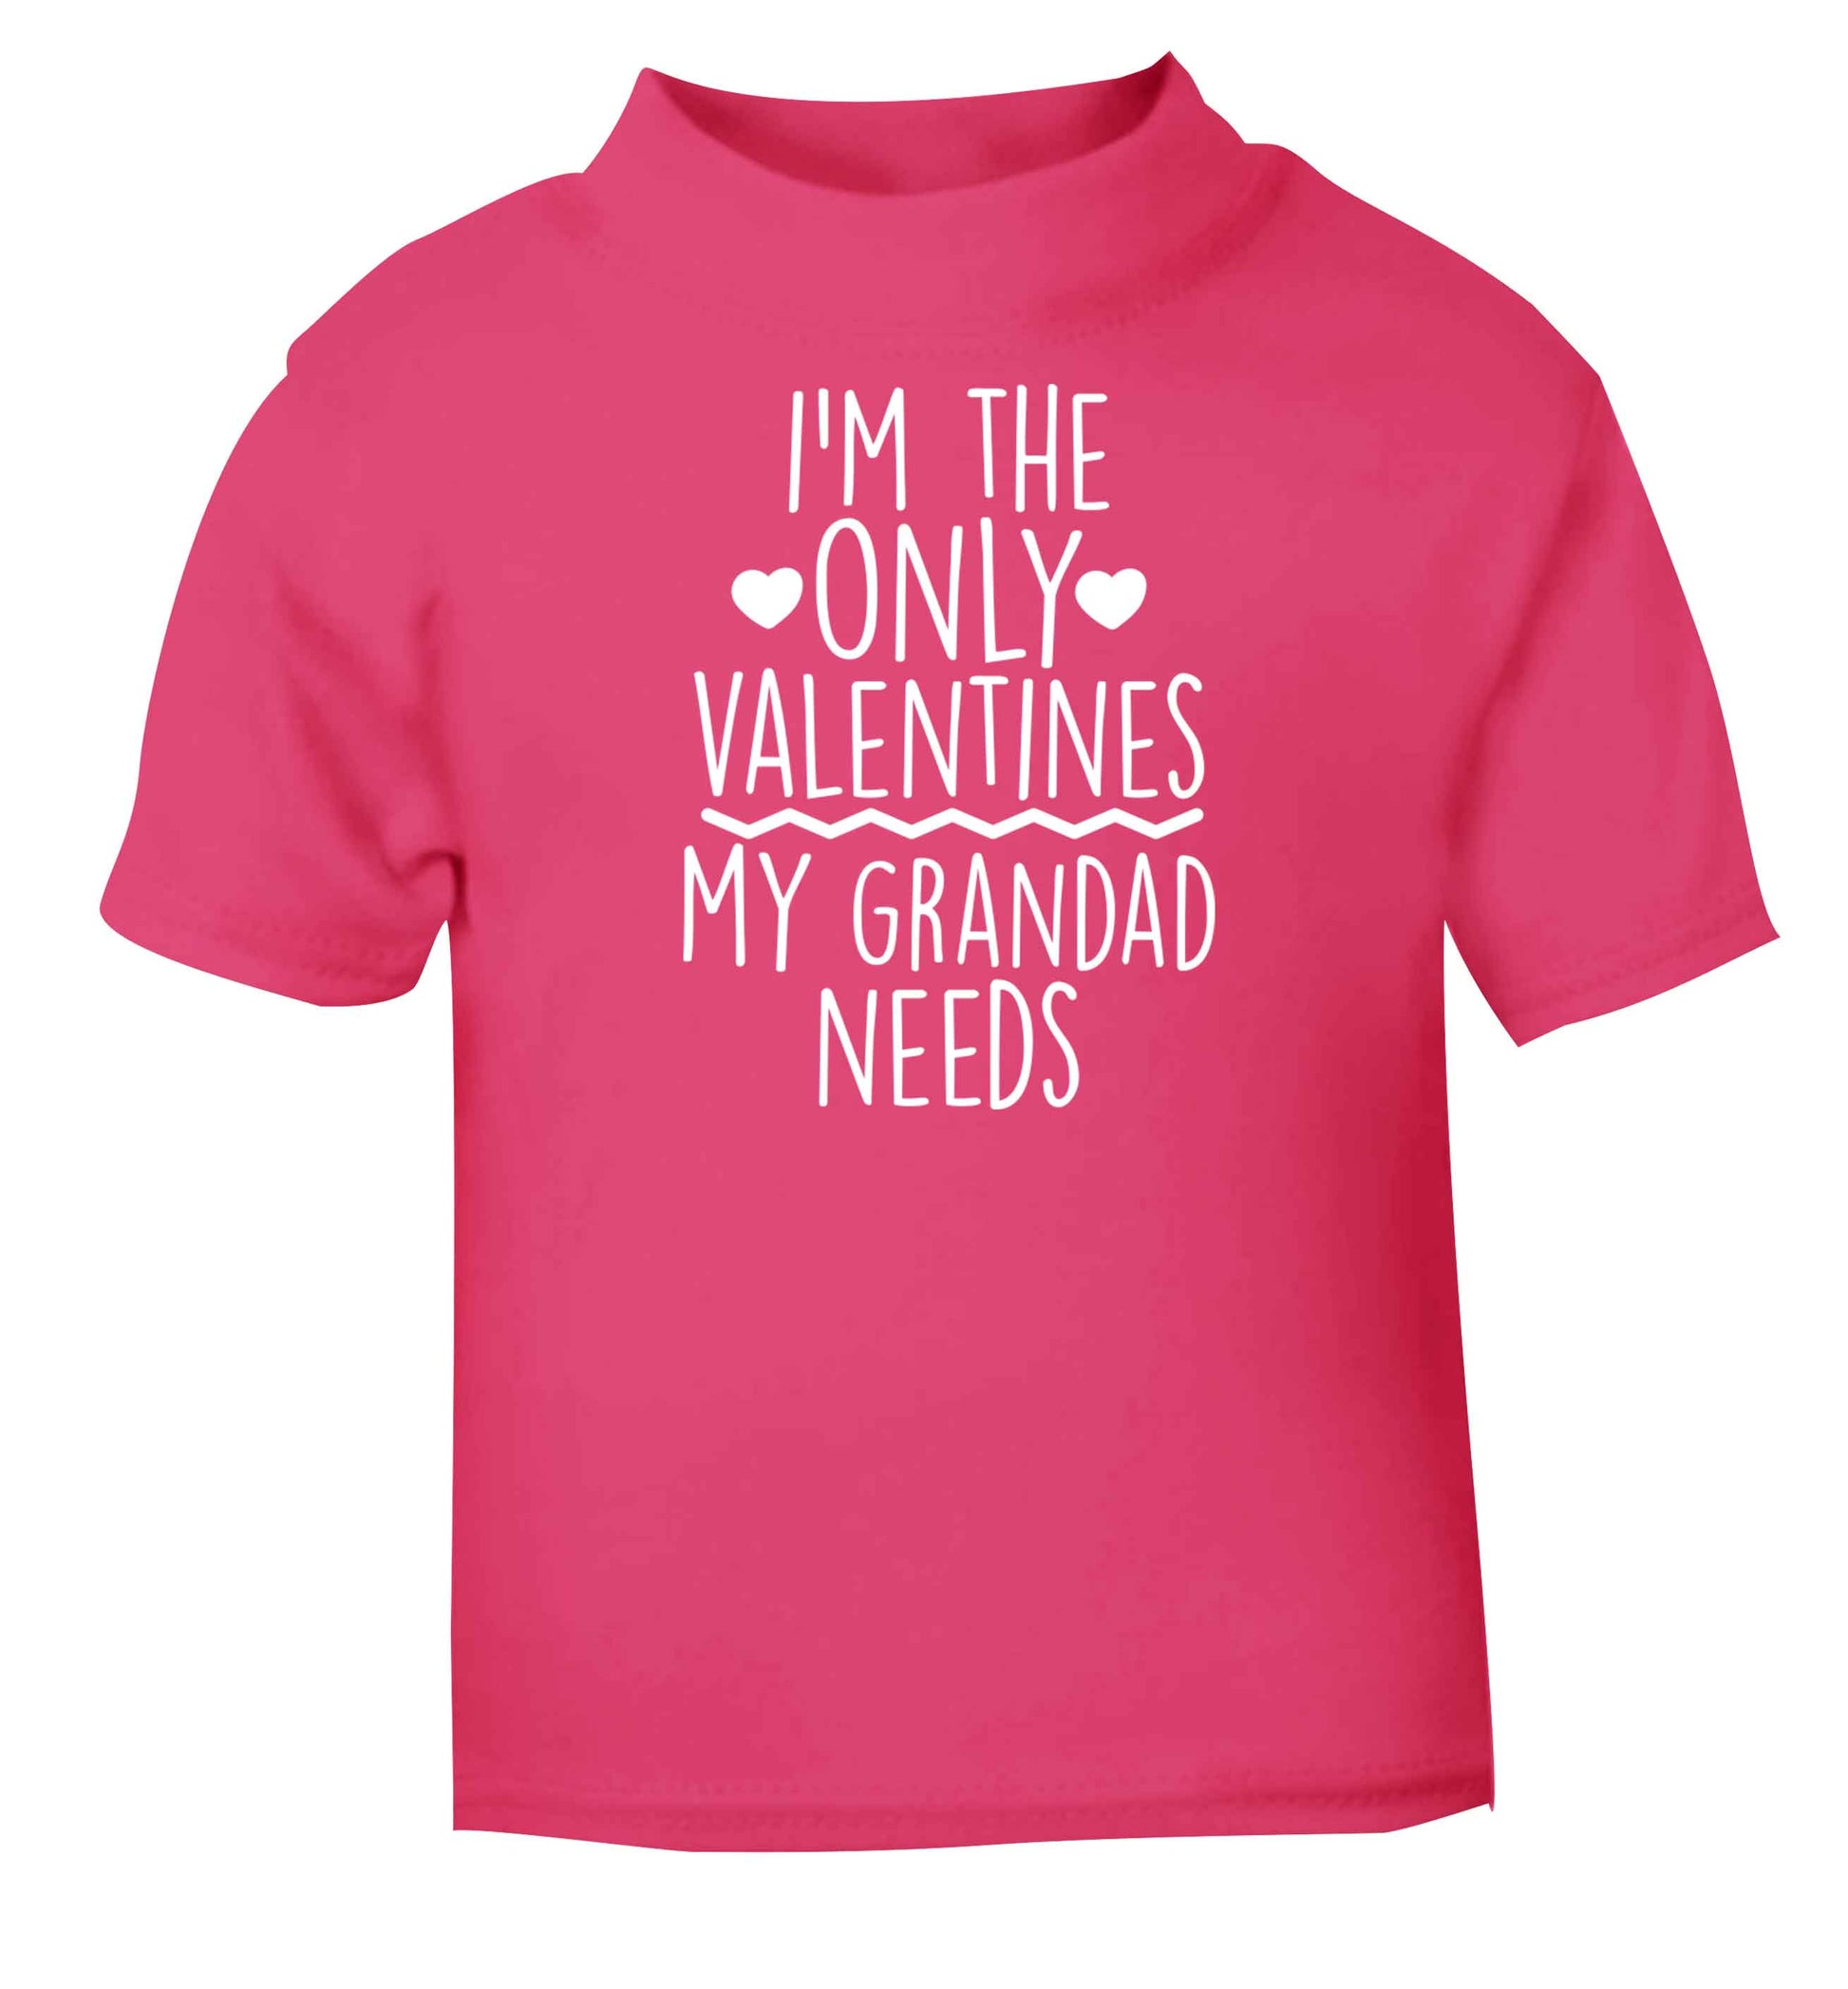 I'm the only valentines my grandad needs pink baby toddler Tshirt 2 Years